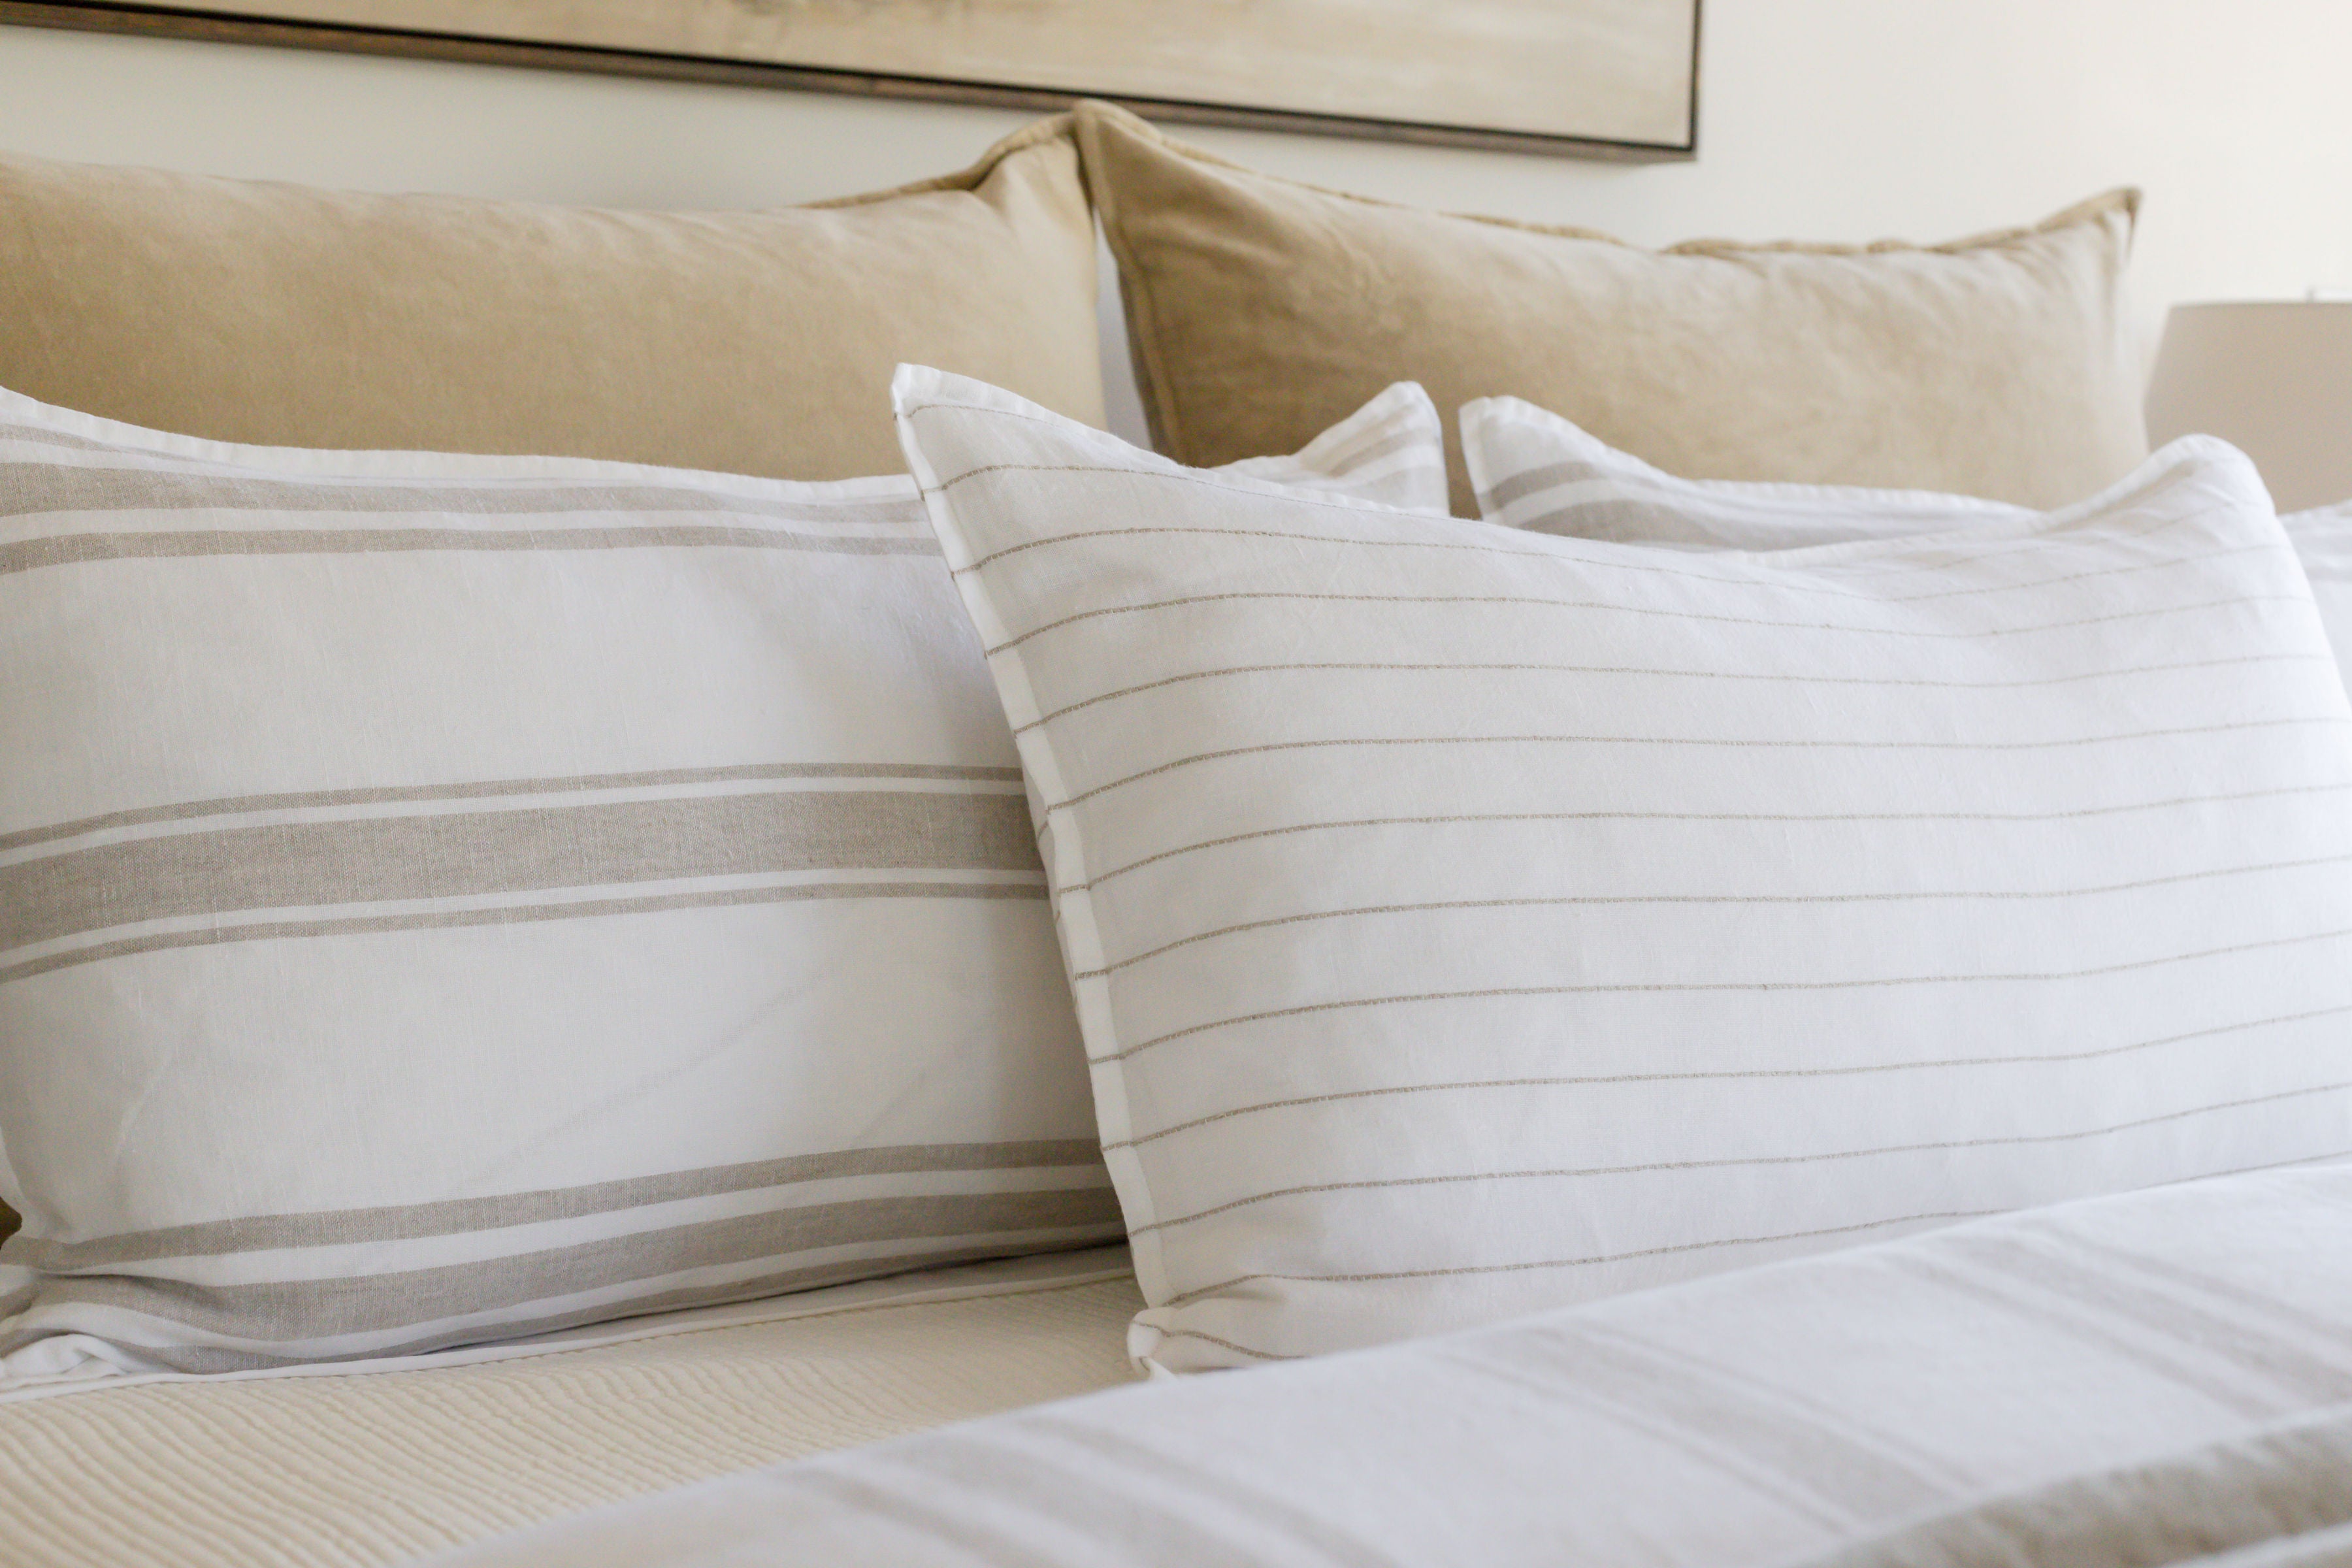 The Impact of Quality Bedding on Your Sleep